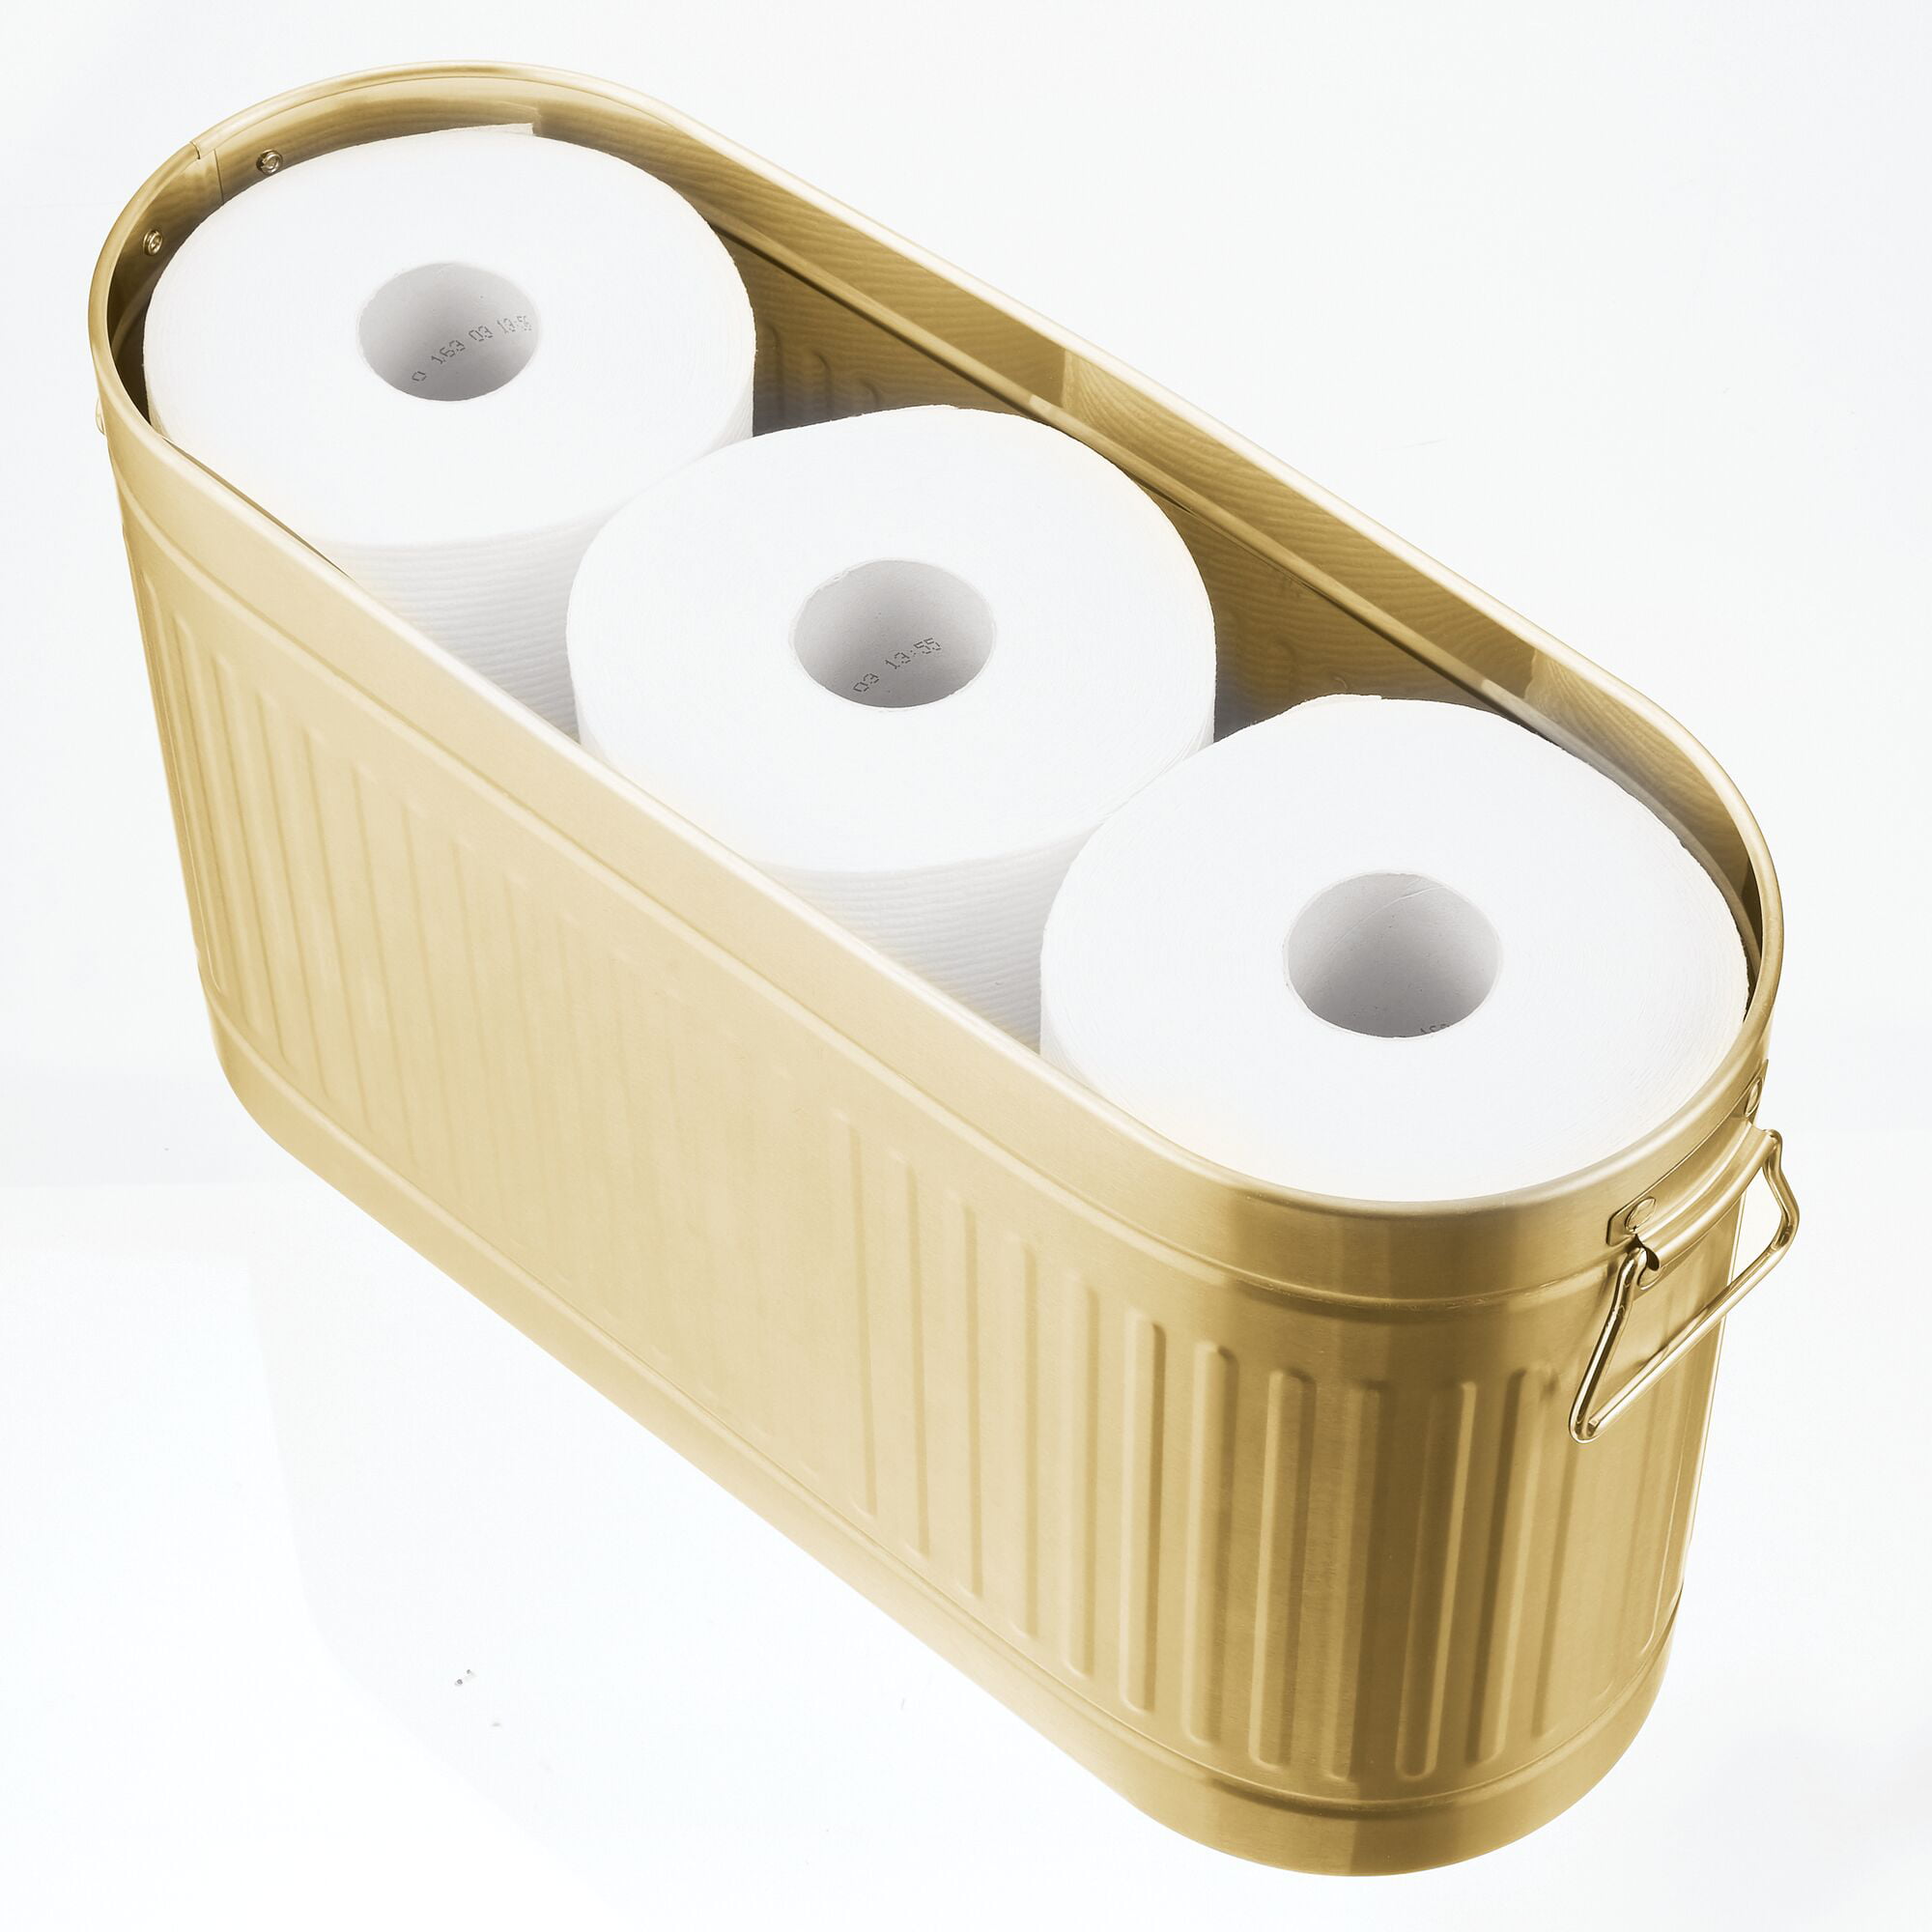 Cream Holds Mega Rolls mDesign Retro Vintage Farmhouse Decorative Metal Toilet Paper Holder Stand with Large Capacity Storage for 6 Rolls of Toilet Tissue Container for Bathroom/Powder Rooms